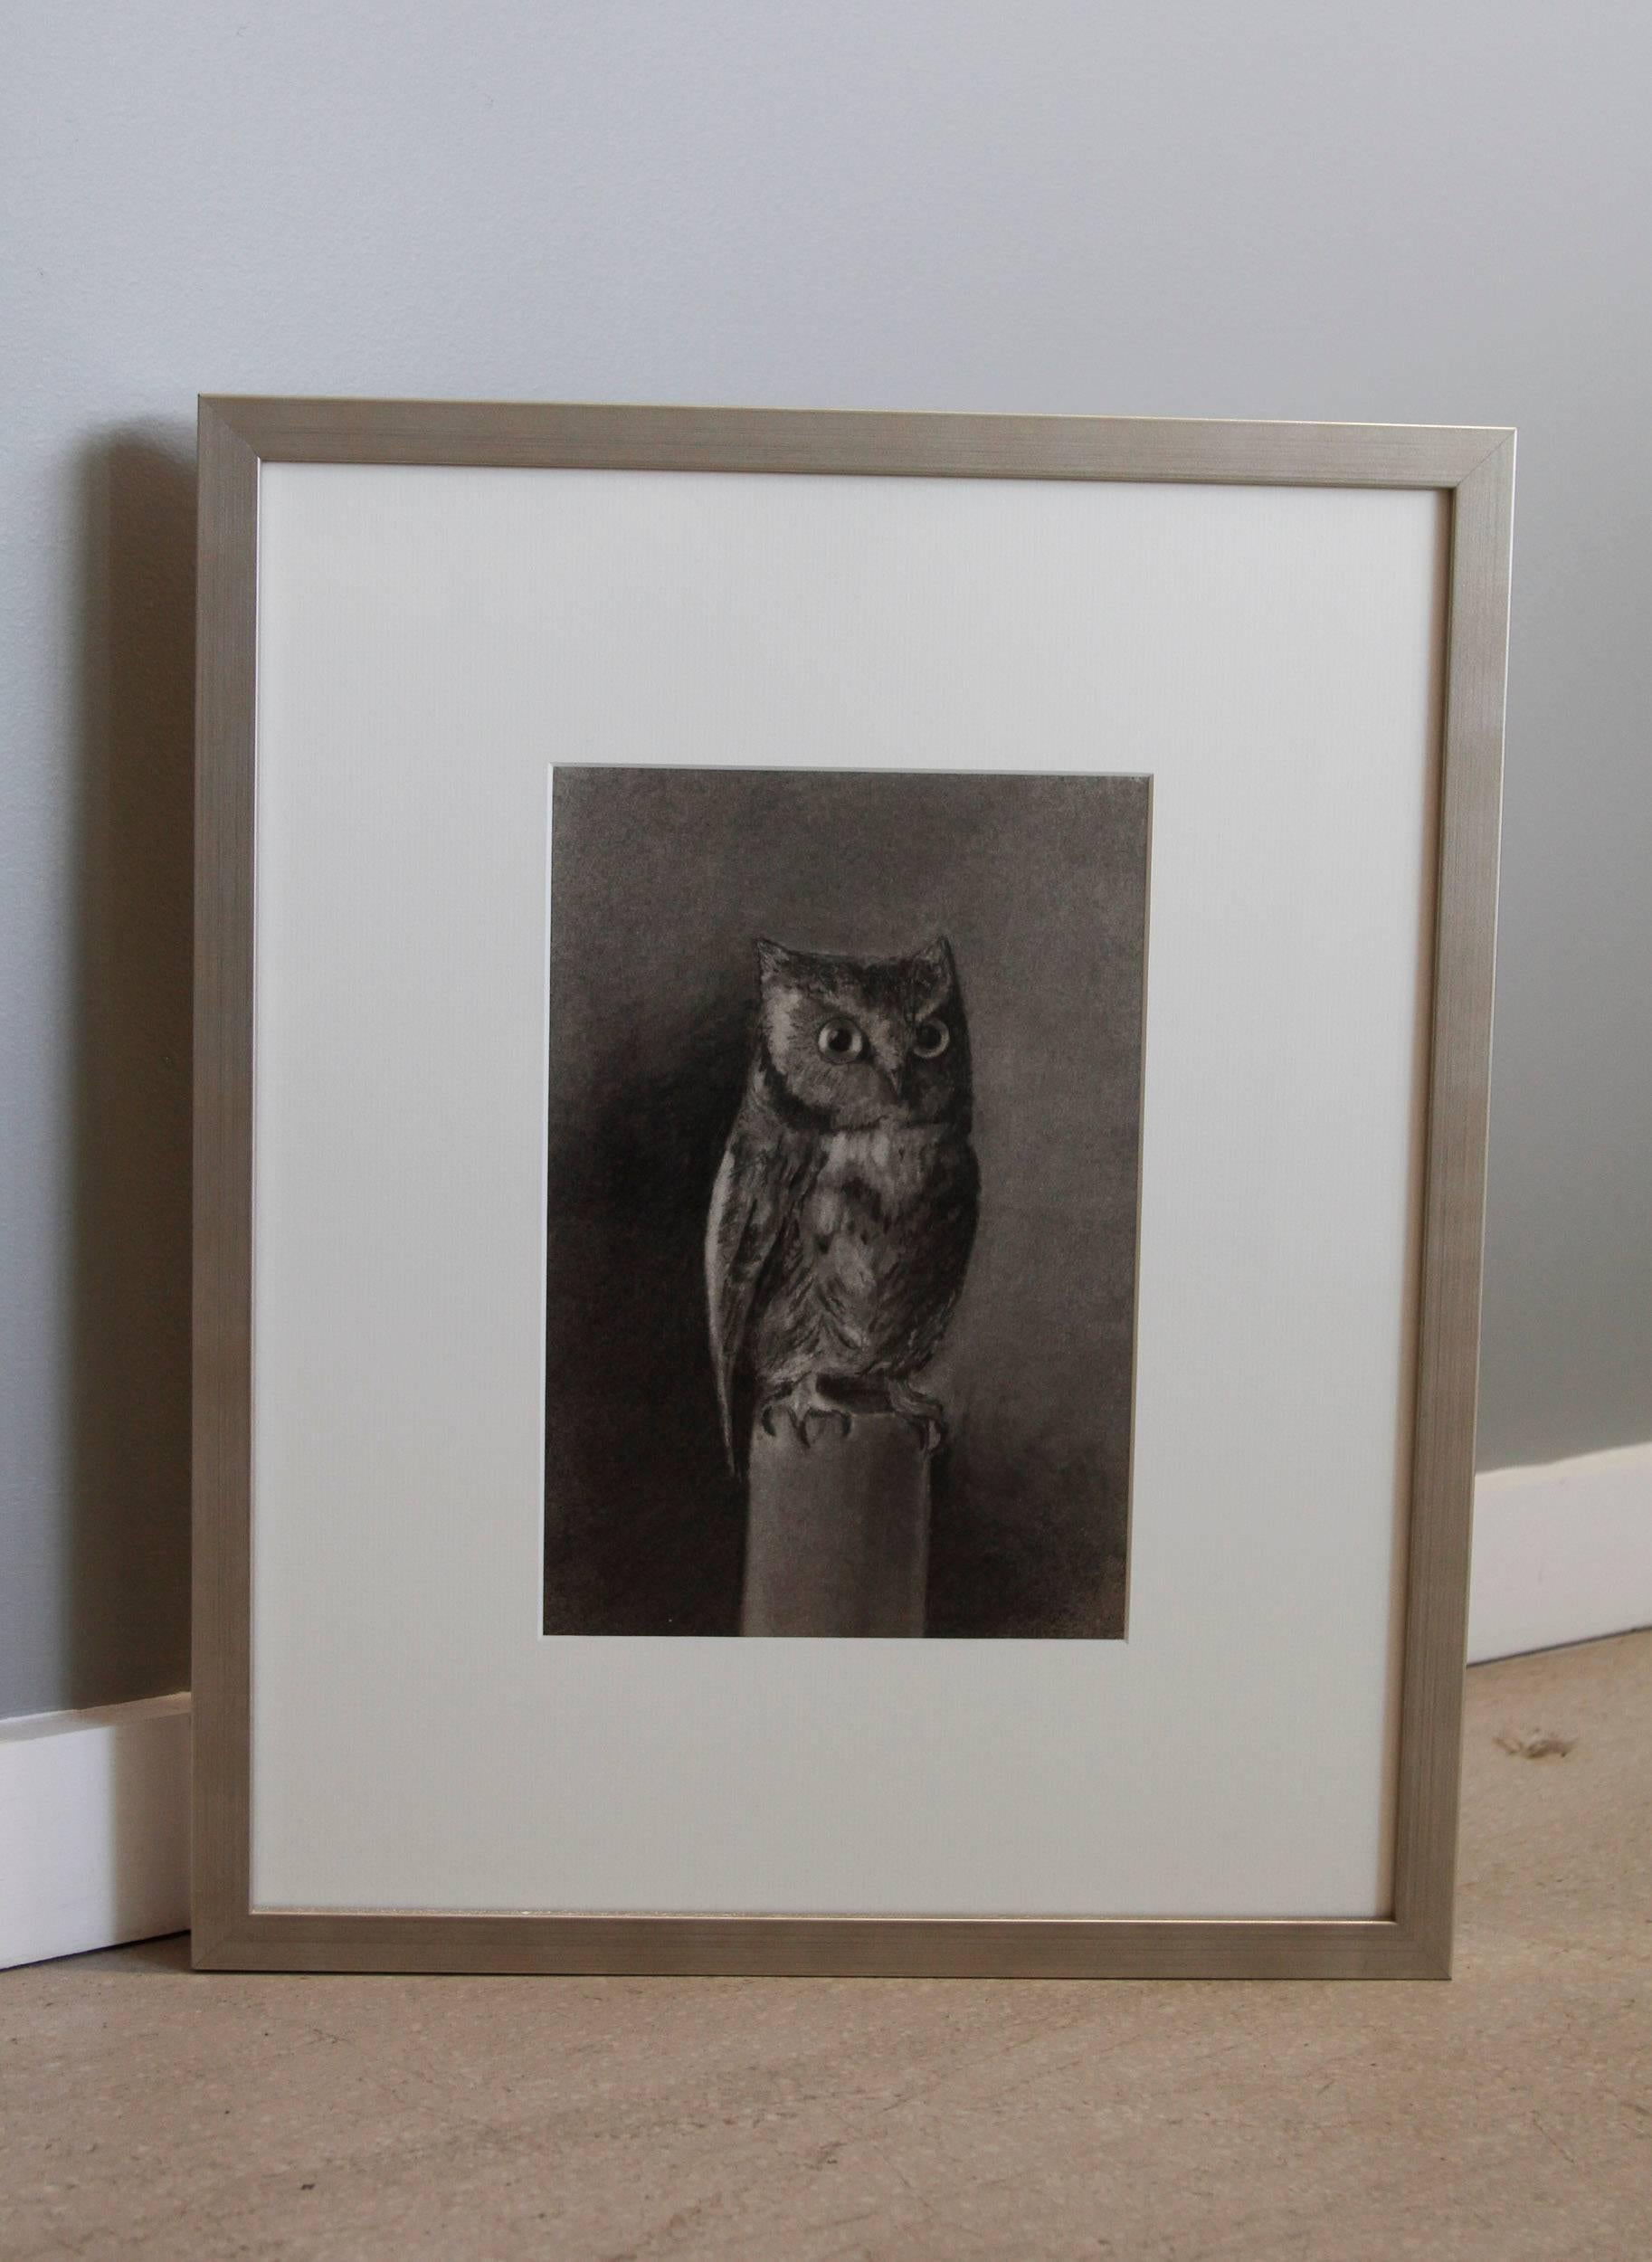 Moody little charcoal drawing of an owl signed O